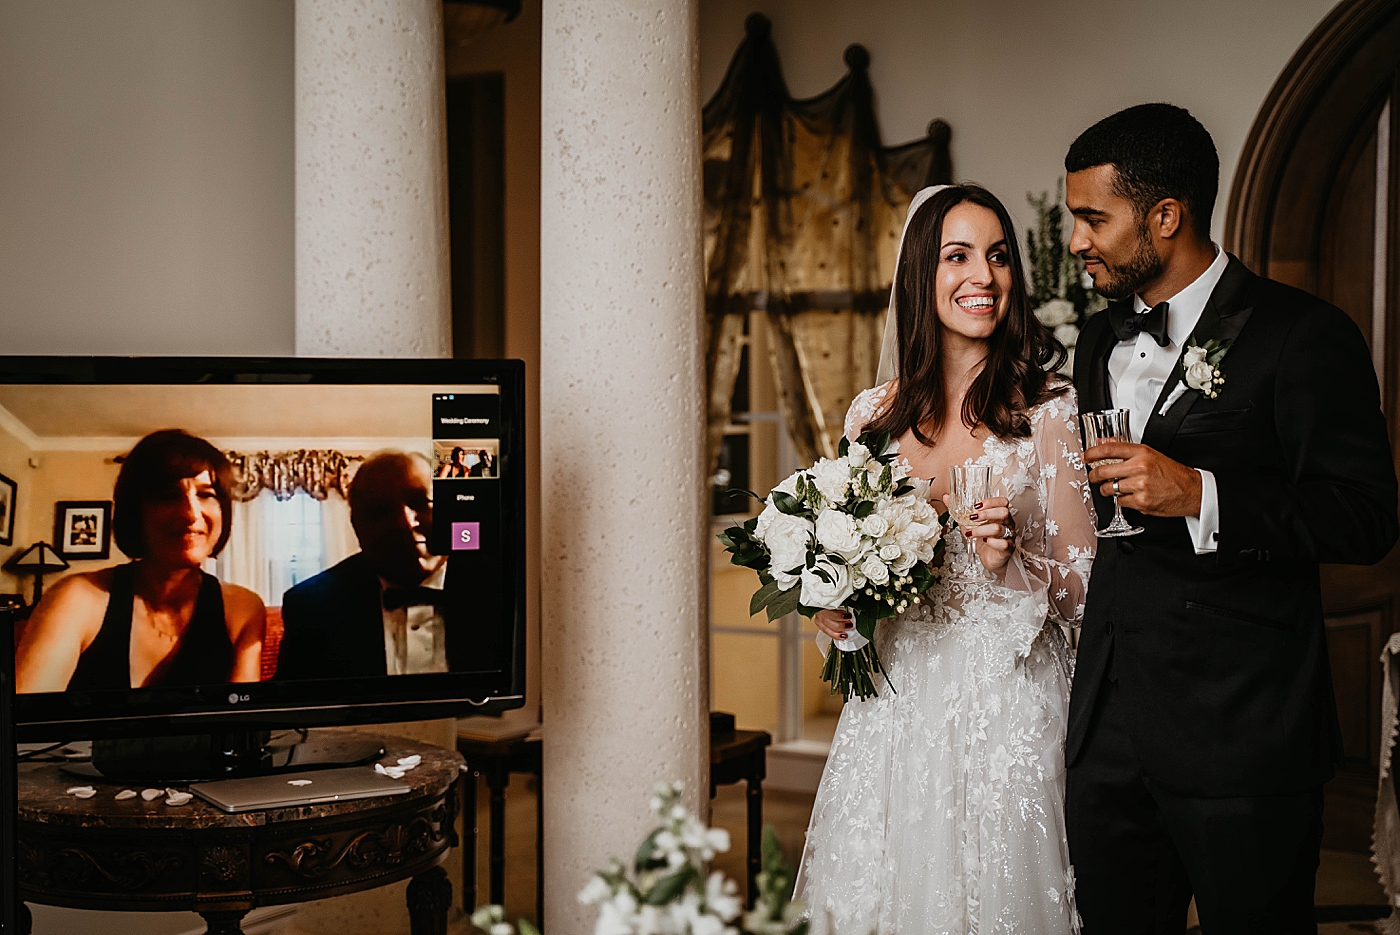 Bride and Groom Zooming Family Intimate Home Wedding captured by South Florida Wedding Photographer Krystal Capone Photography